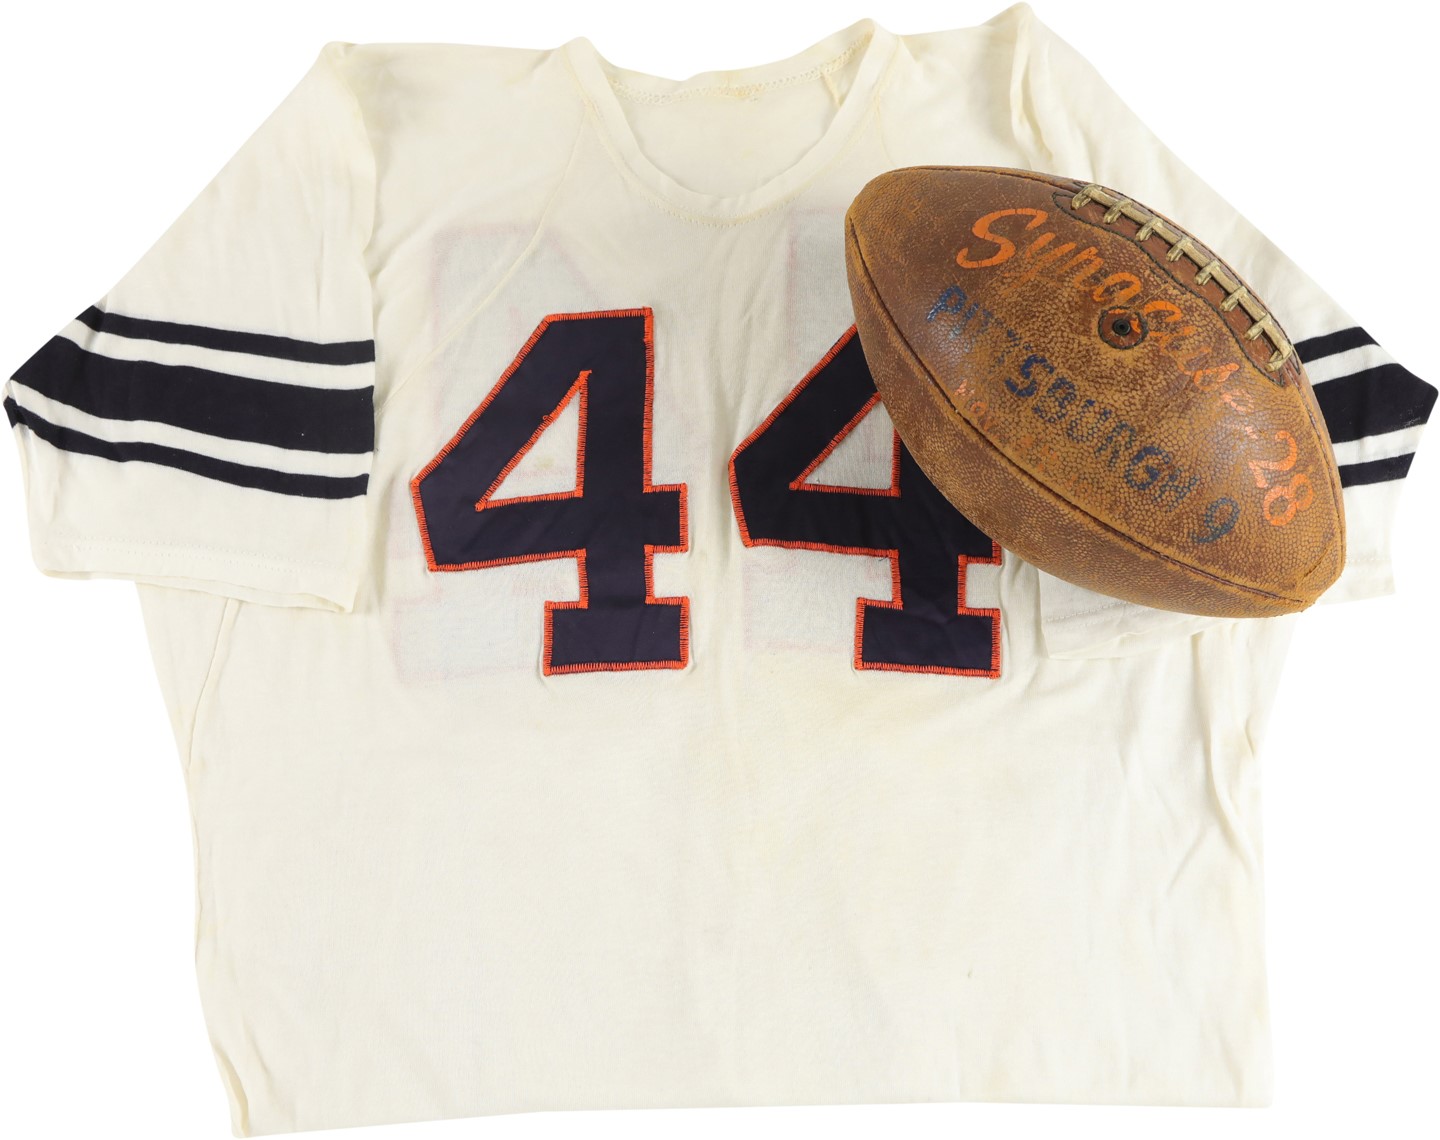 11/4/1961 Ernie Davis Syracuse vs. Pittsburgh Game Worn Jersey and Game Ball - Heisman Trophy Season (Gifted Directly by Ernie Davis with Photo Proof)